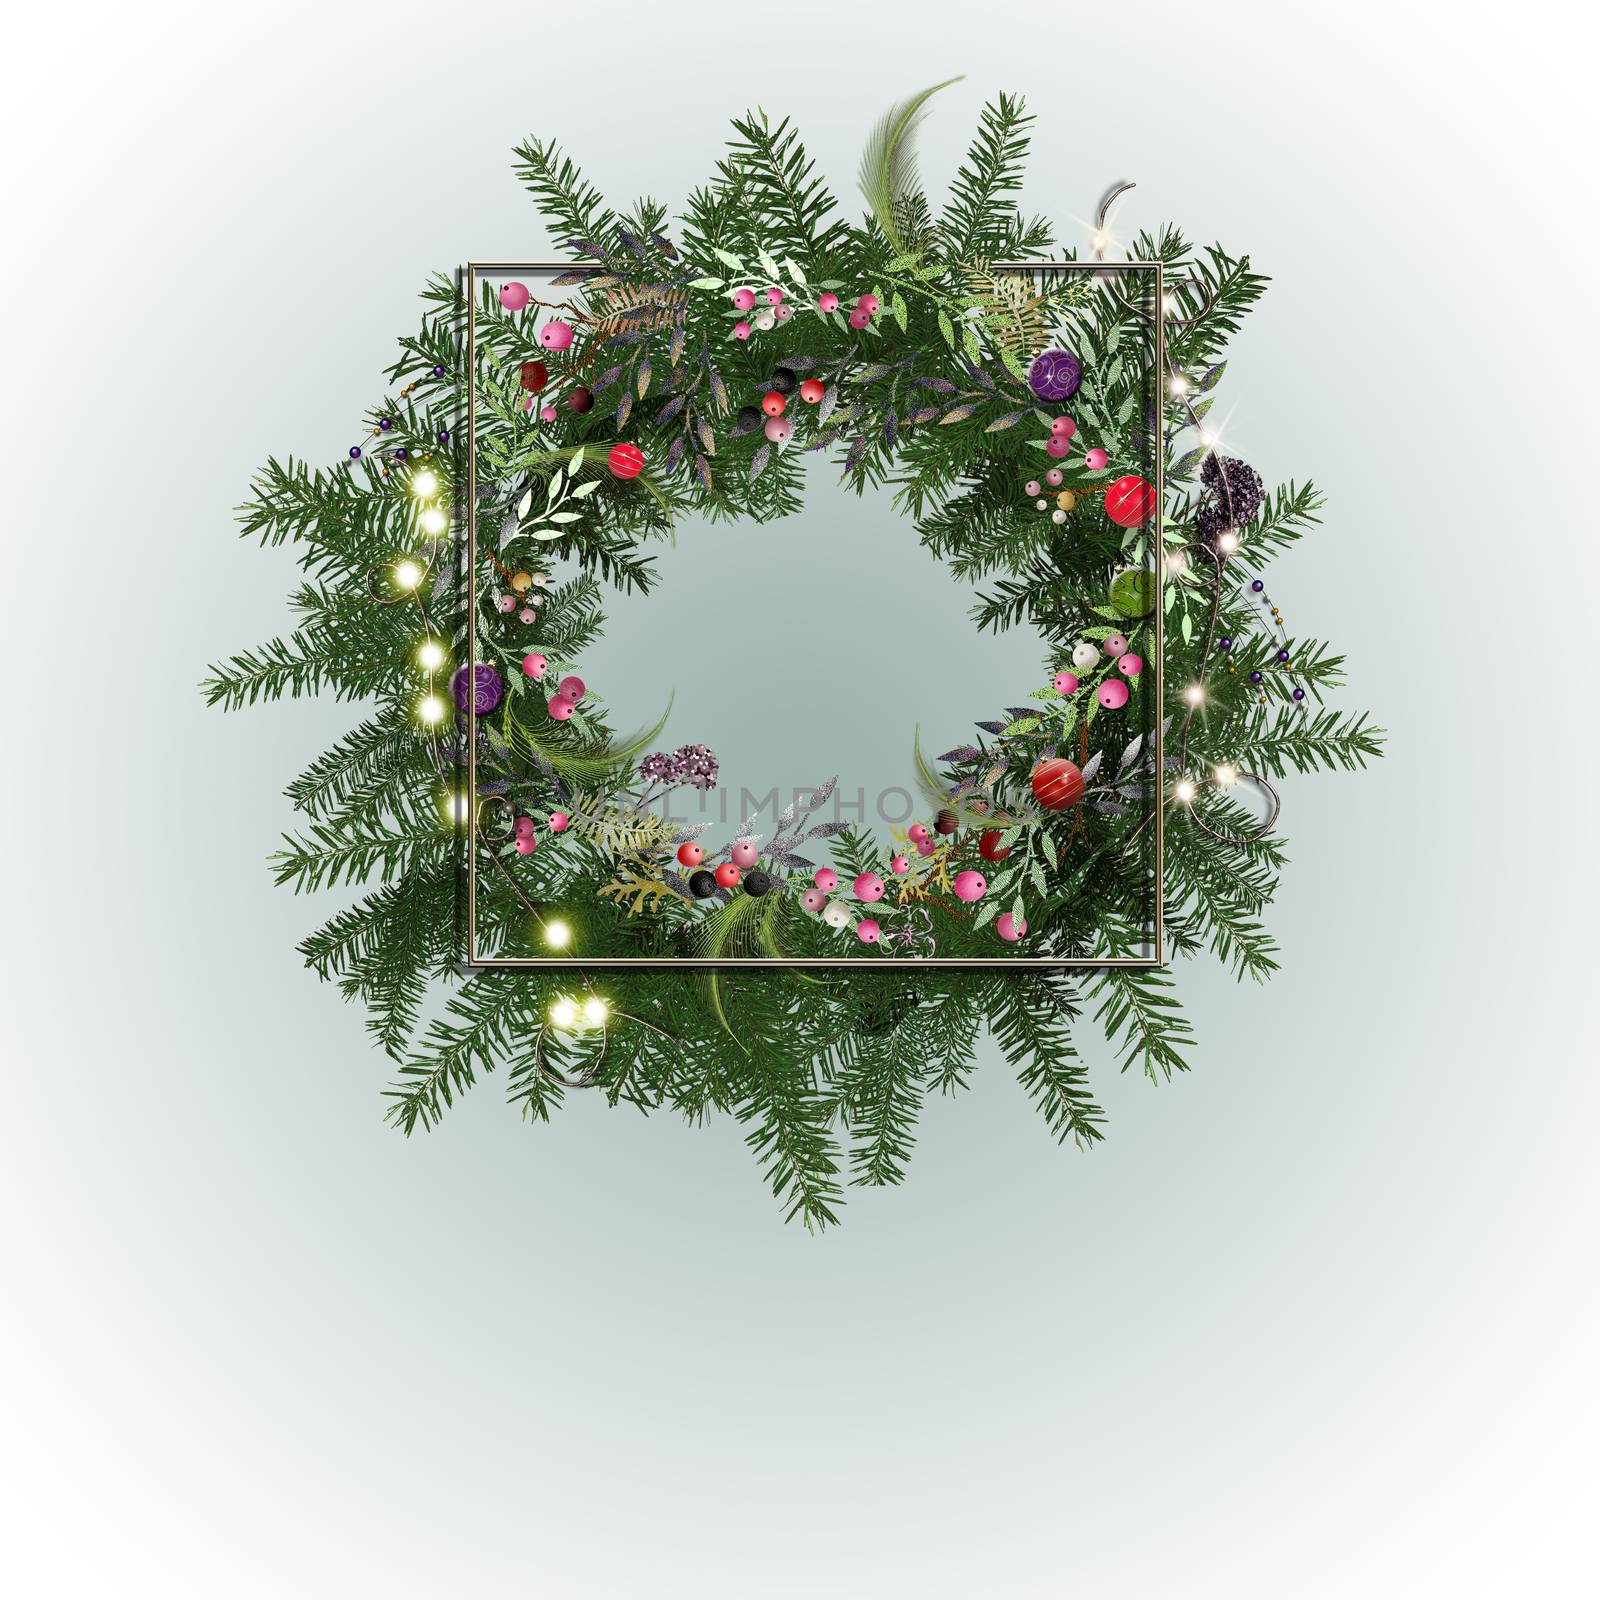 Christmas wreath with floral design by NelliPolk